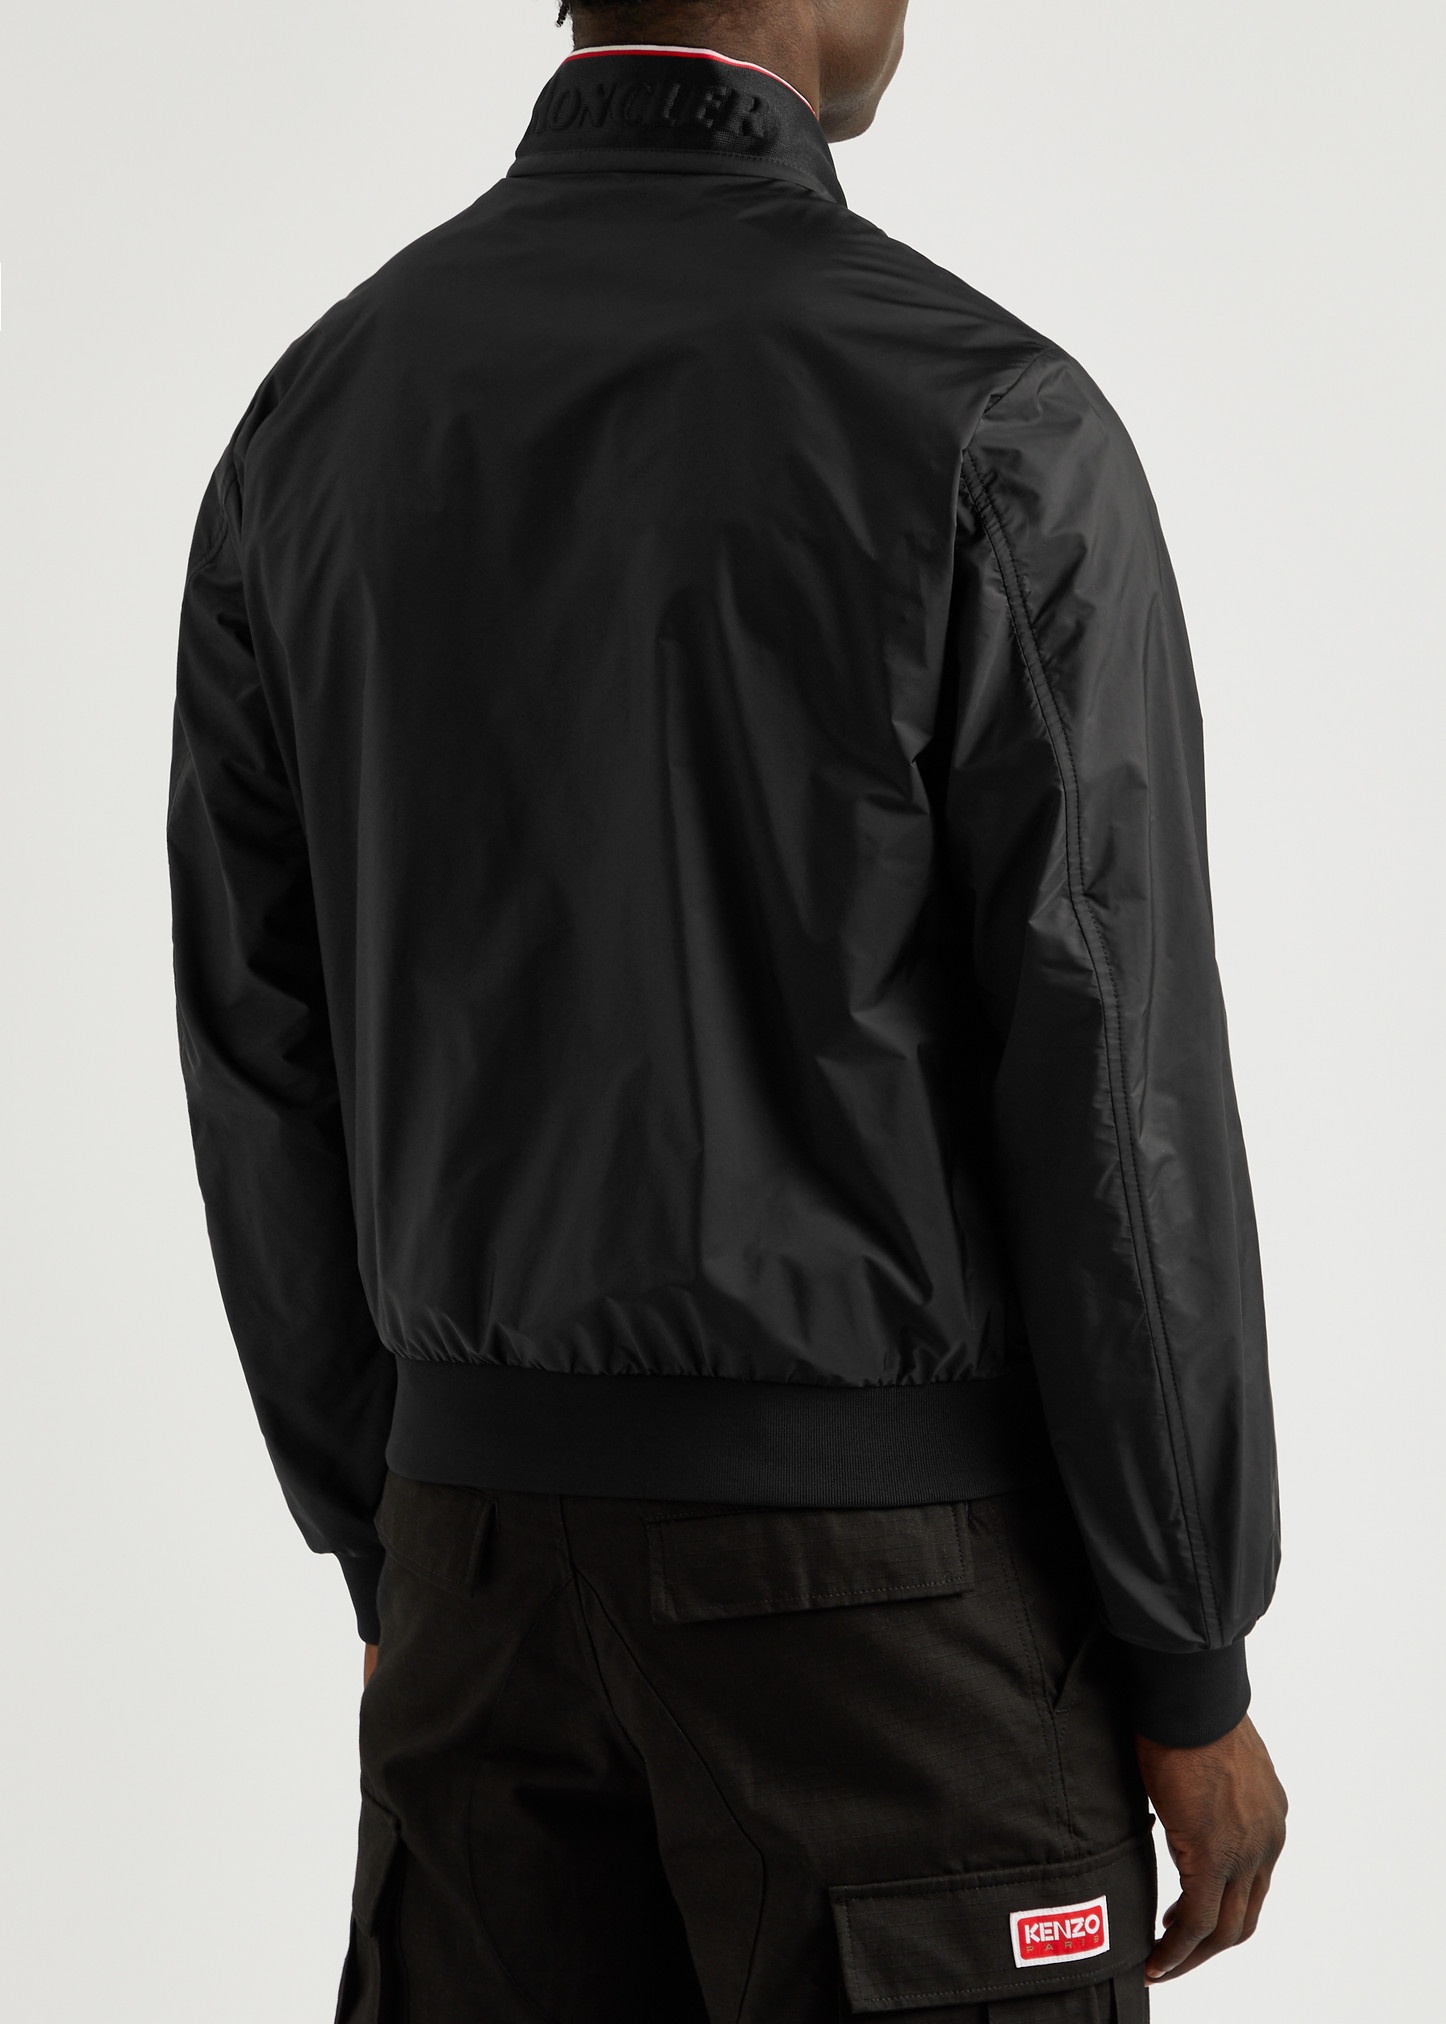 Reppe shell jacket - 3